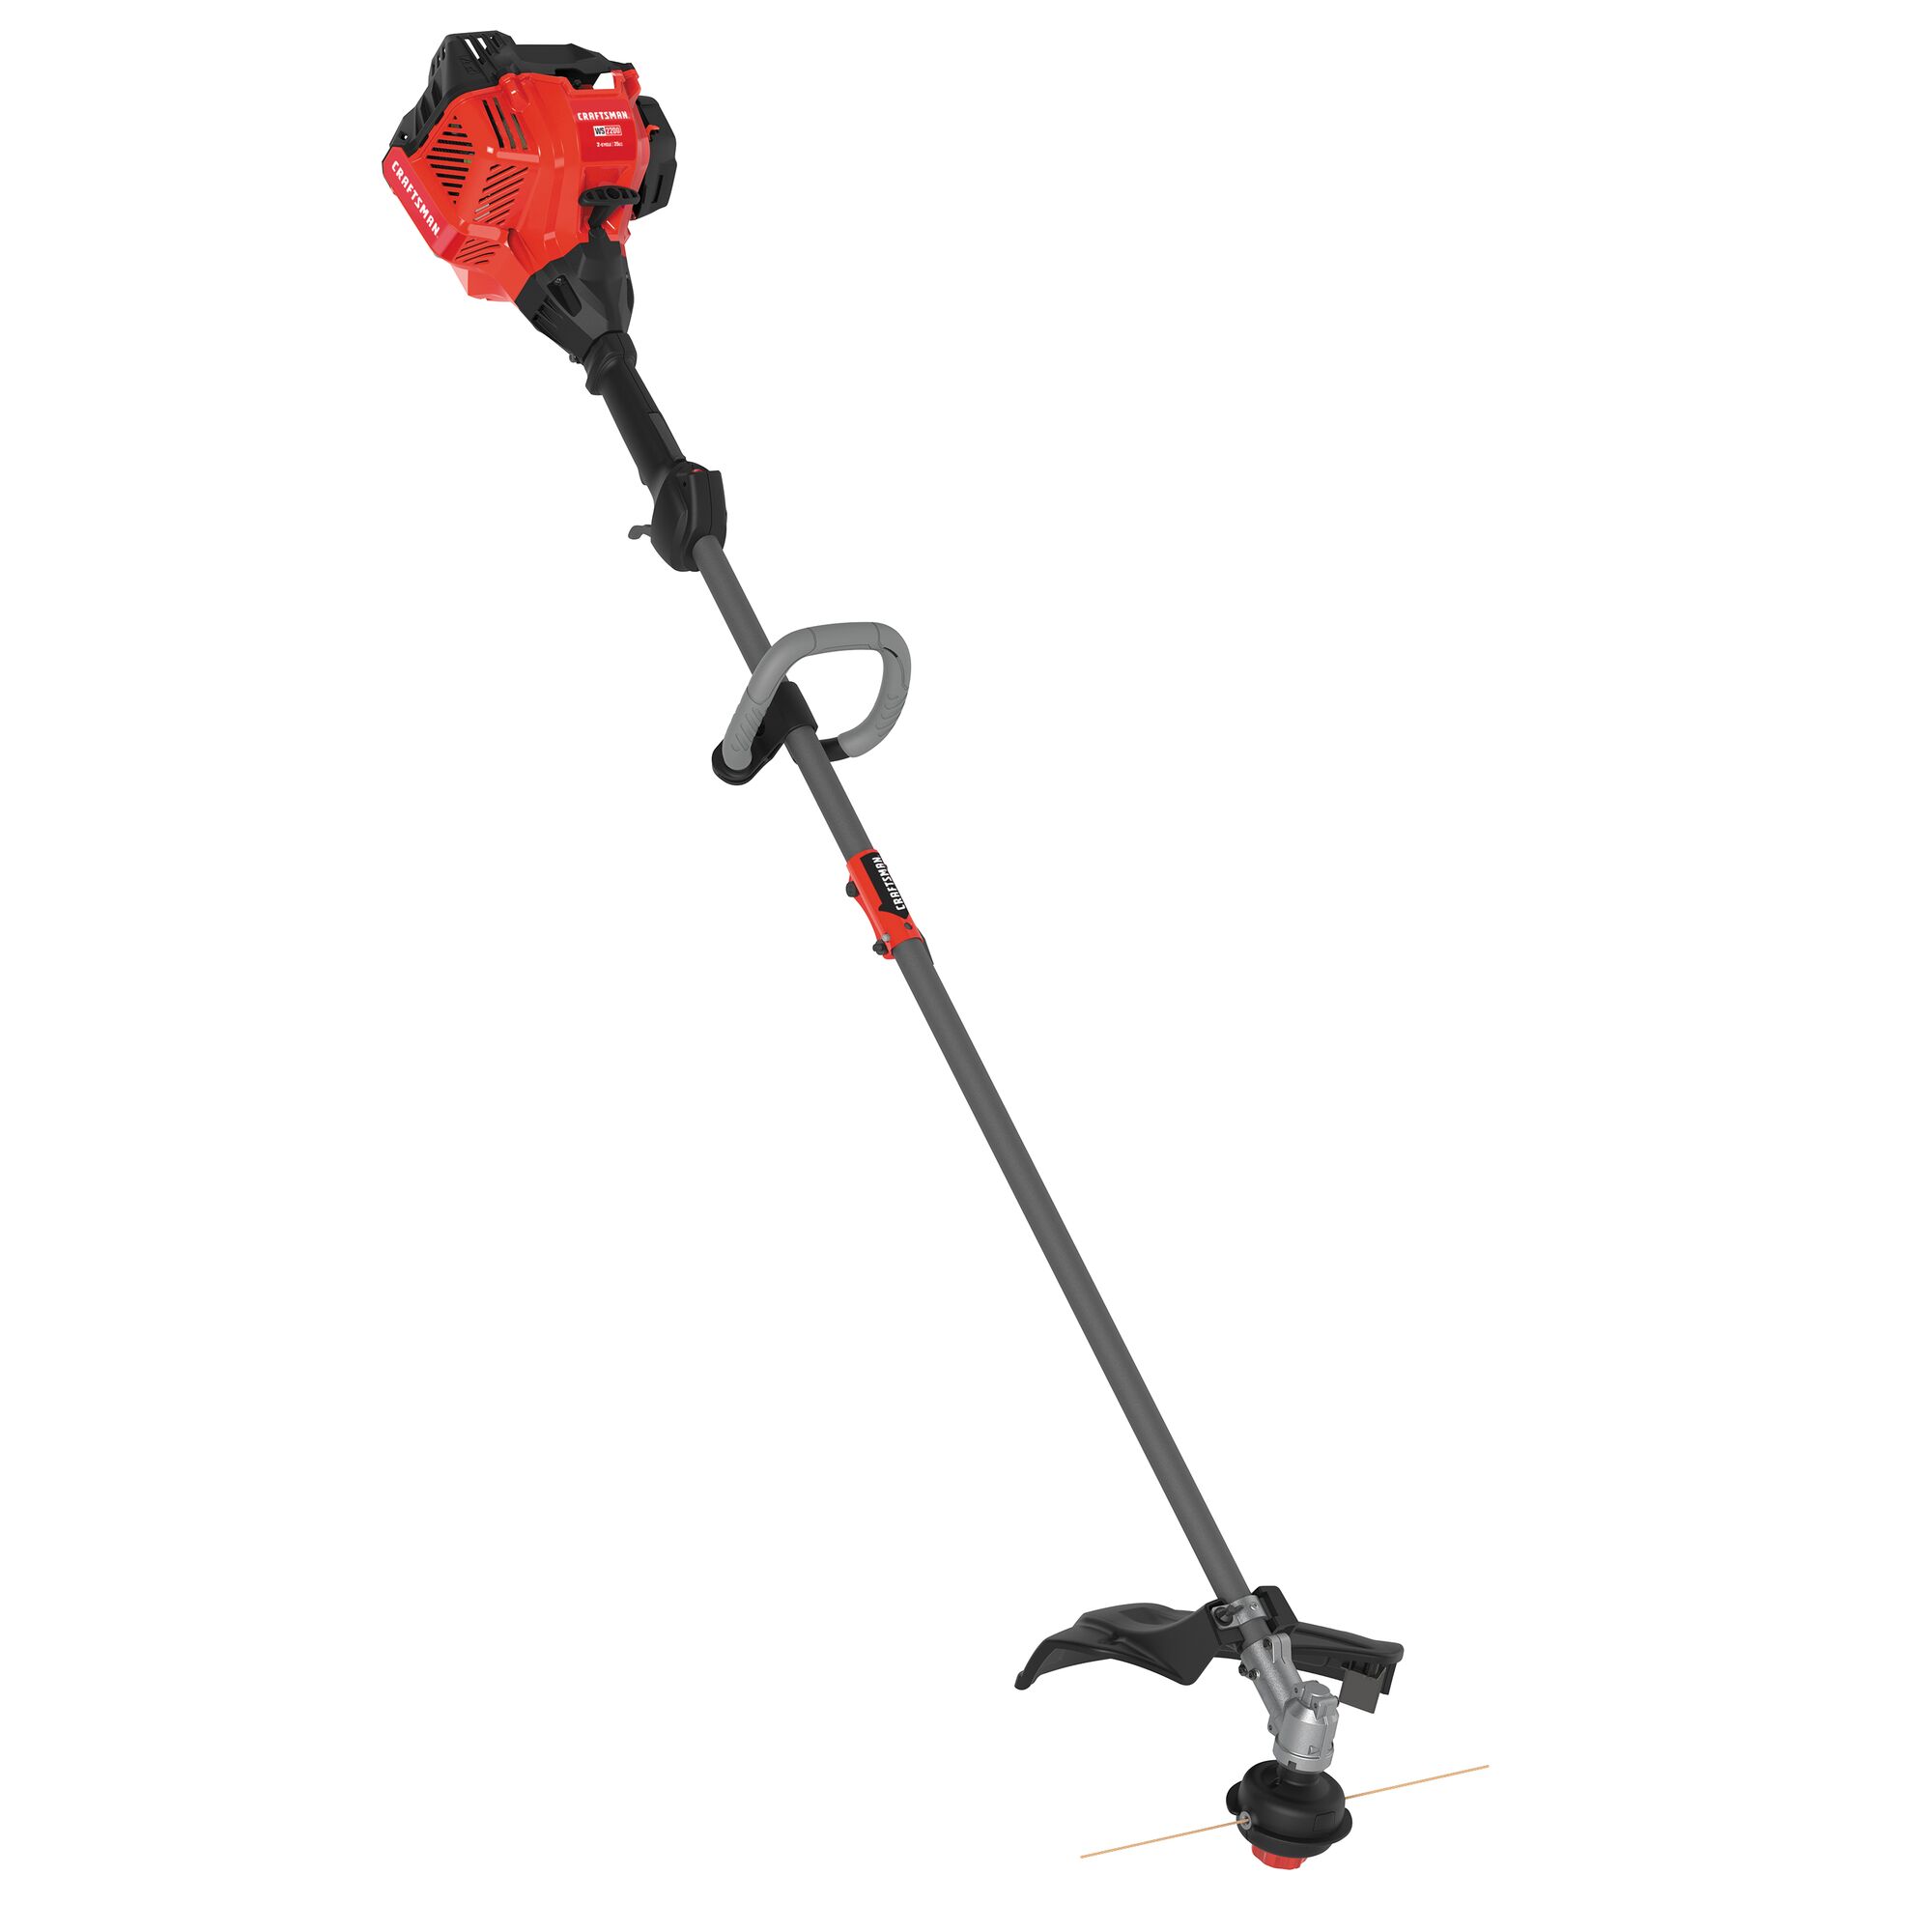 Left profile of  W S 2200 weedwacker 25 C C 2 cycle 17 inch attachment capable straight shaft gas trimmer.